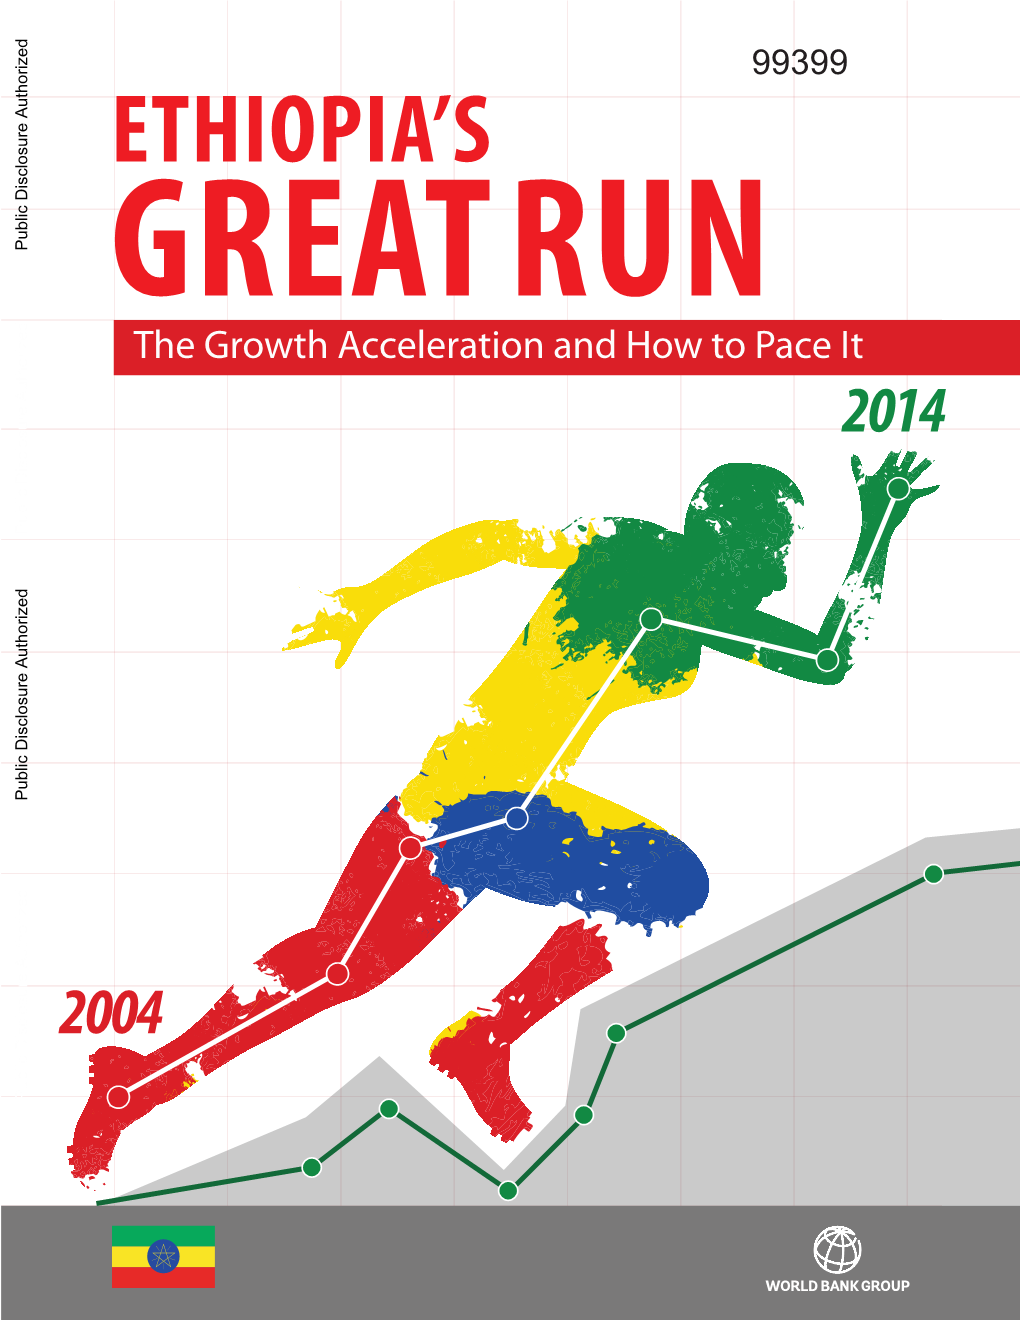 ETHIOPIA’S Public Disclosure Authorized GREATRUN the Growth Acceleration and How to Pace It 2014 Public Disclosure Authorized Public Disclosure Authorized